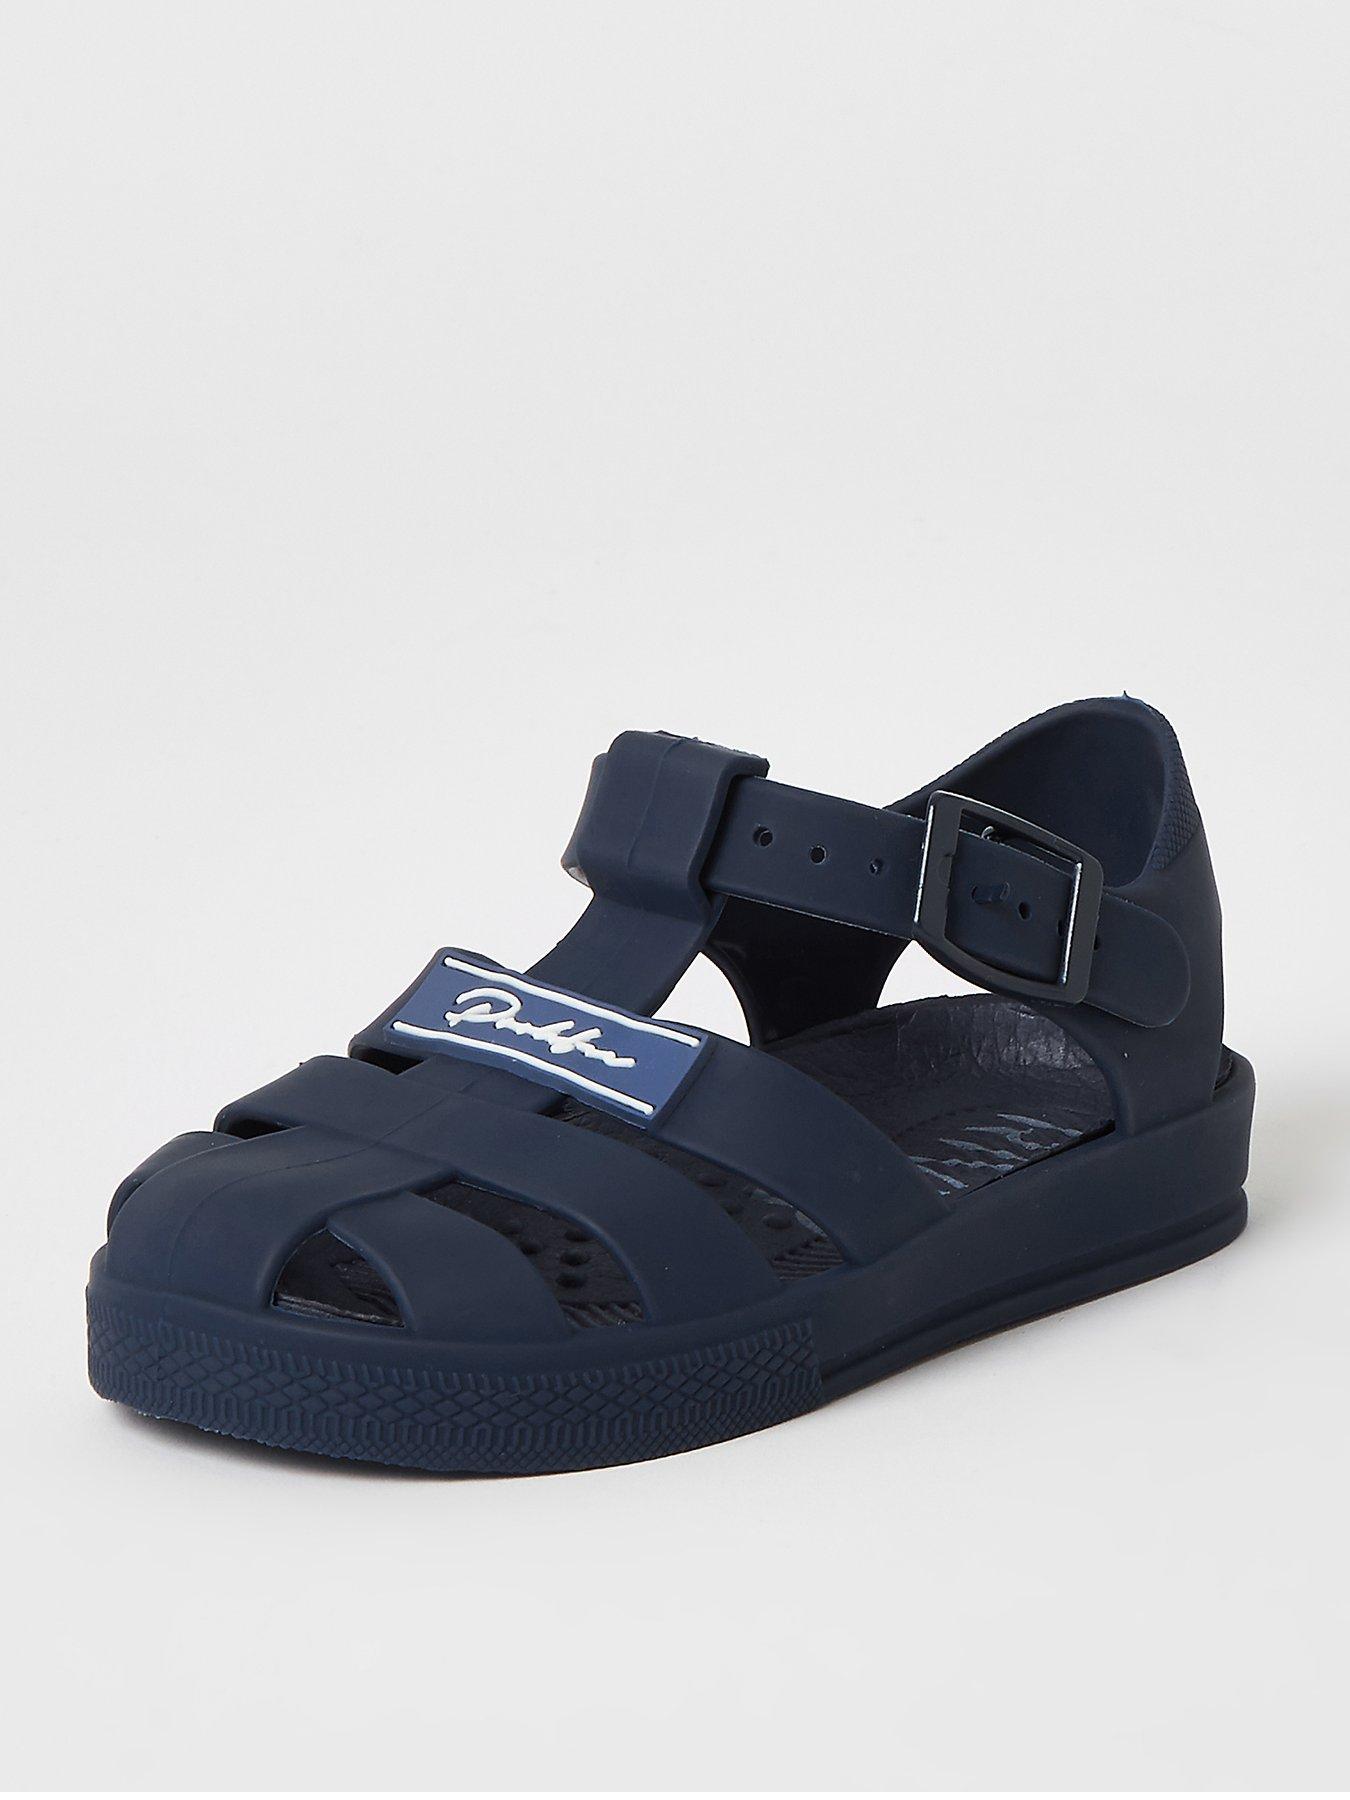 navy jelly sandals